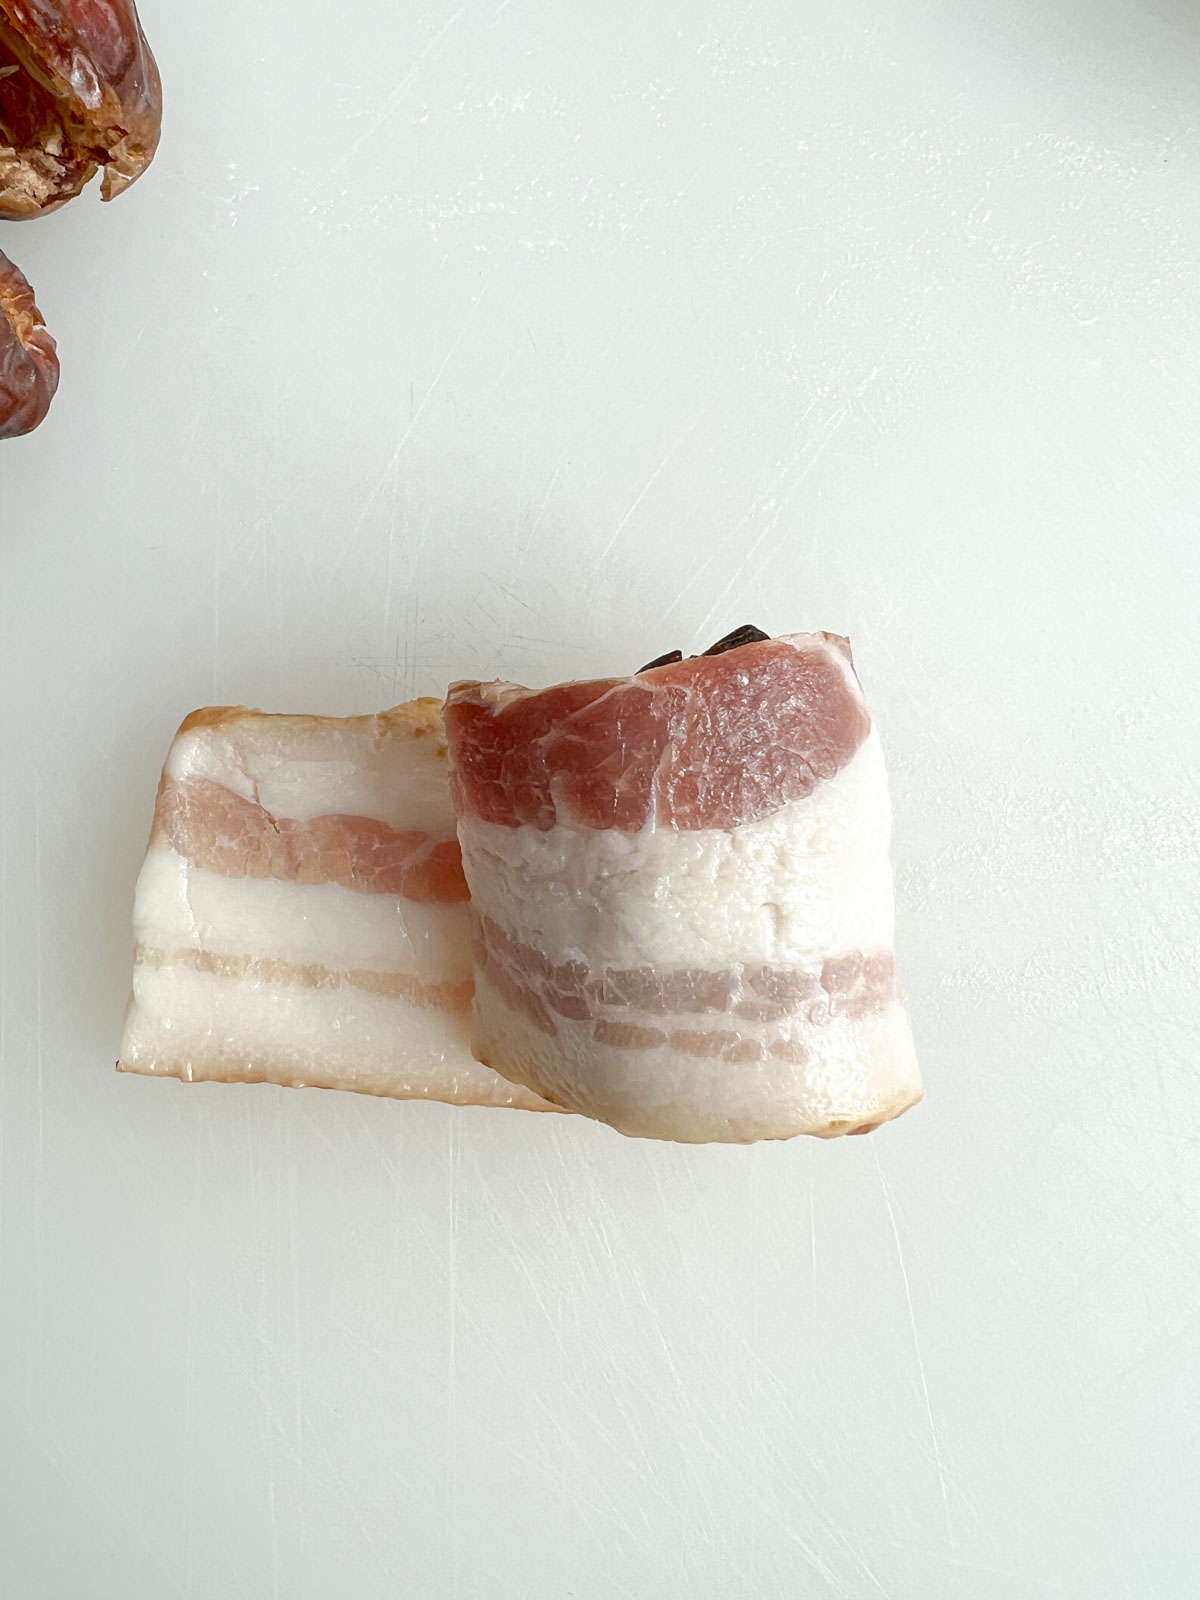 bacon wrapped halfway around a date on a white plastic cutting board